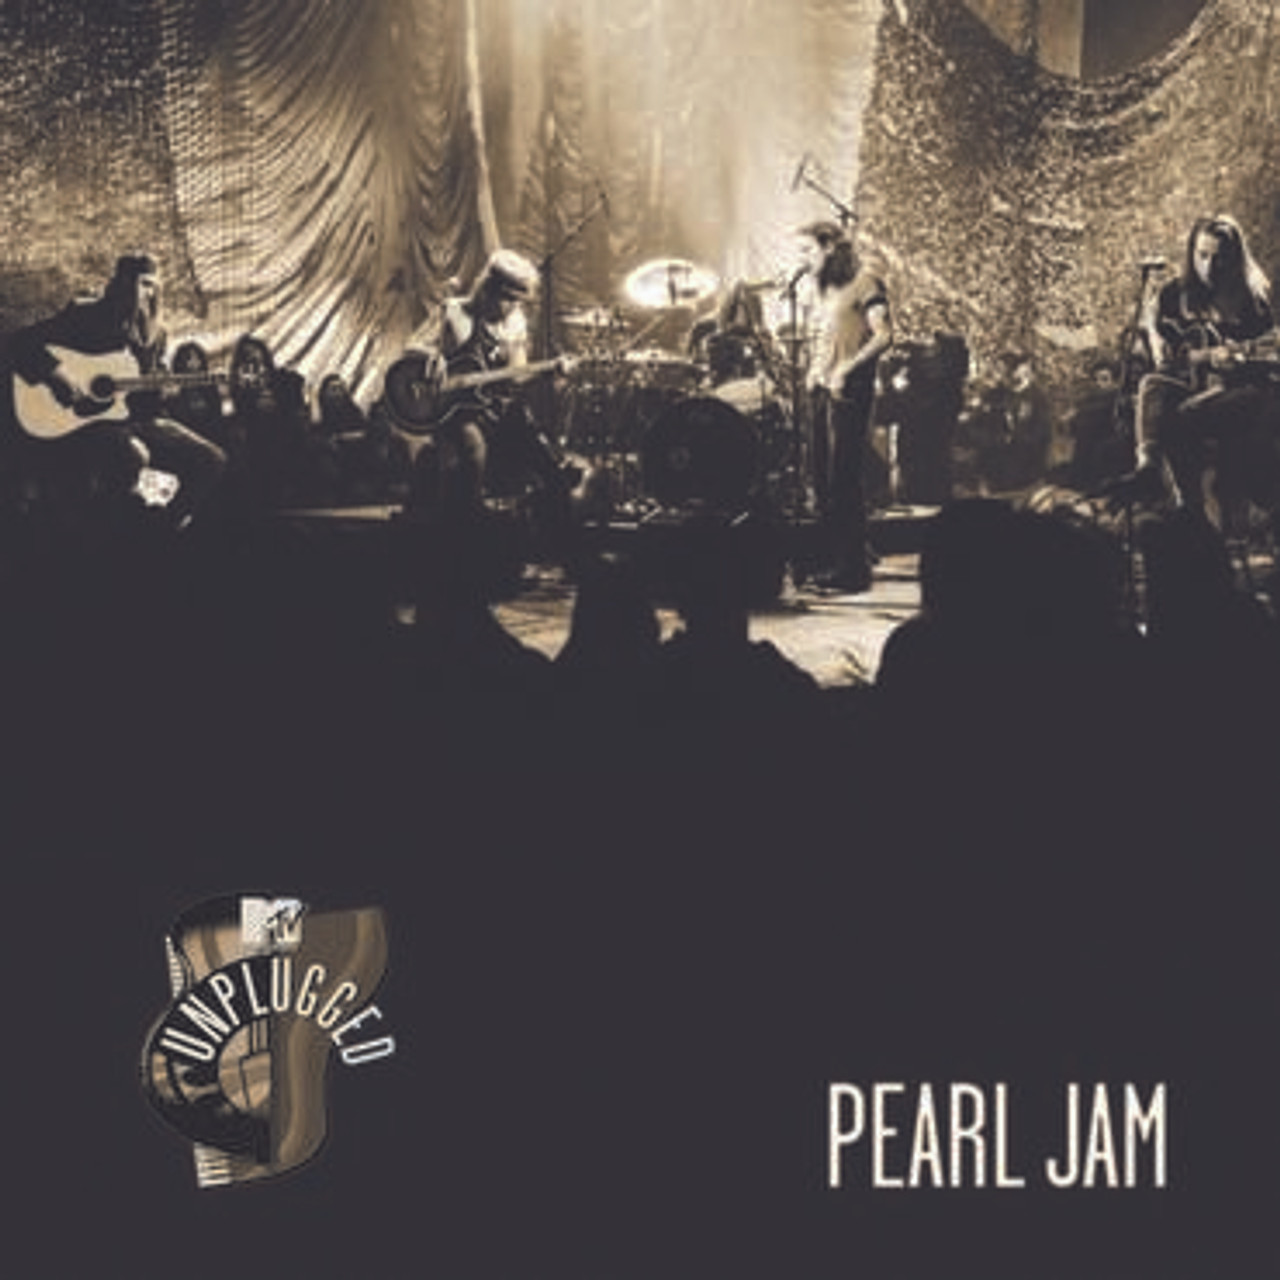 MTV Unplugged, the Pearl Jam session